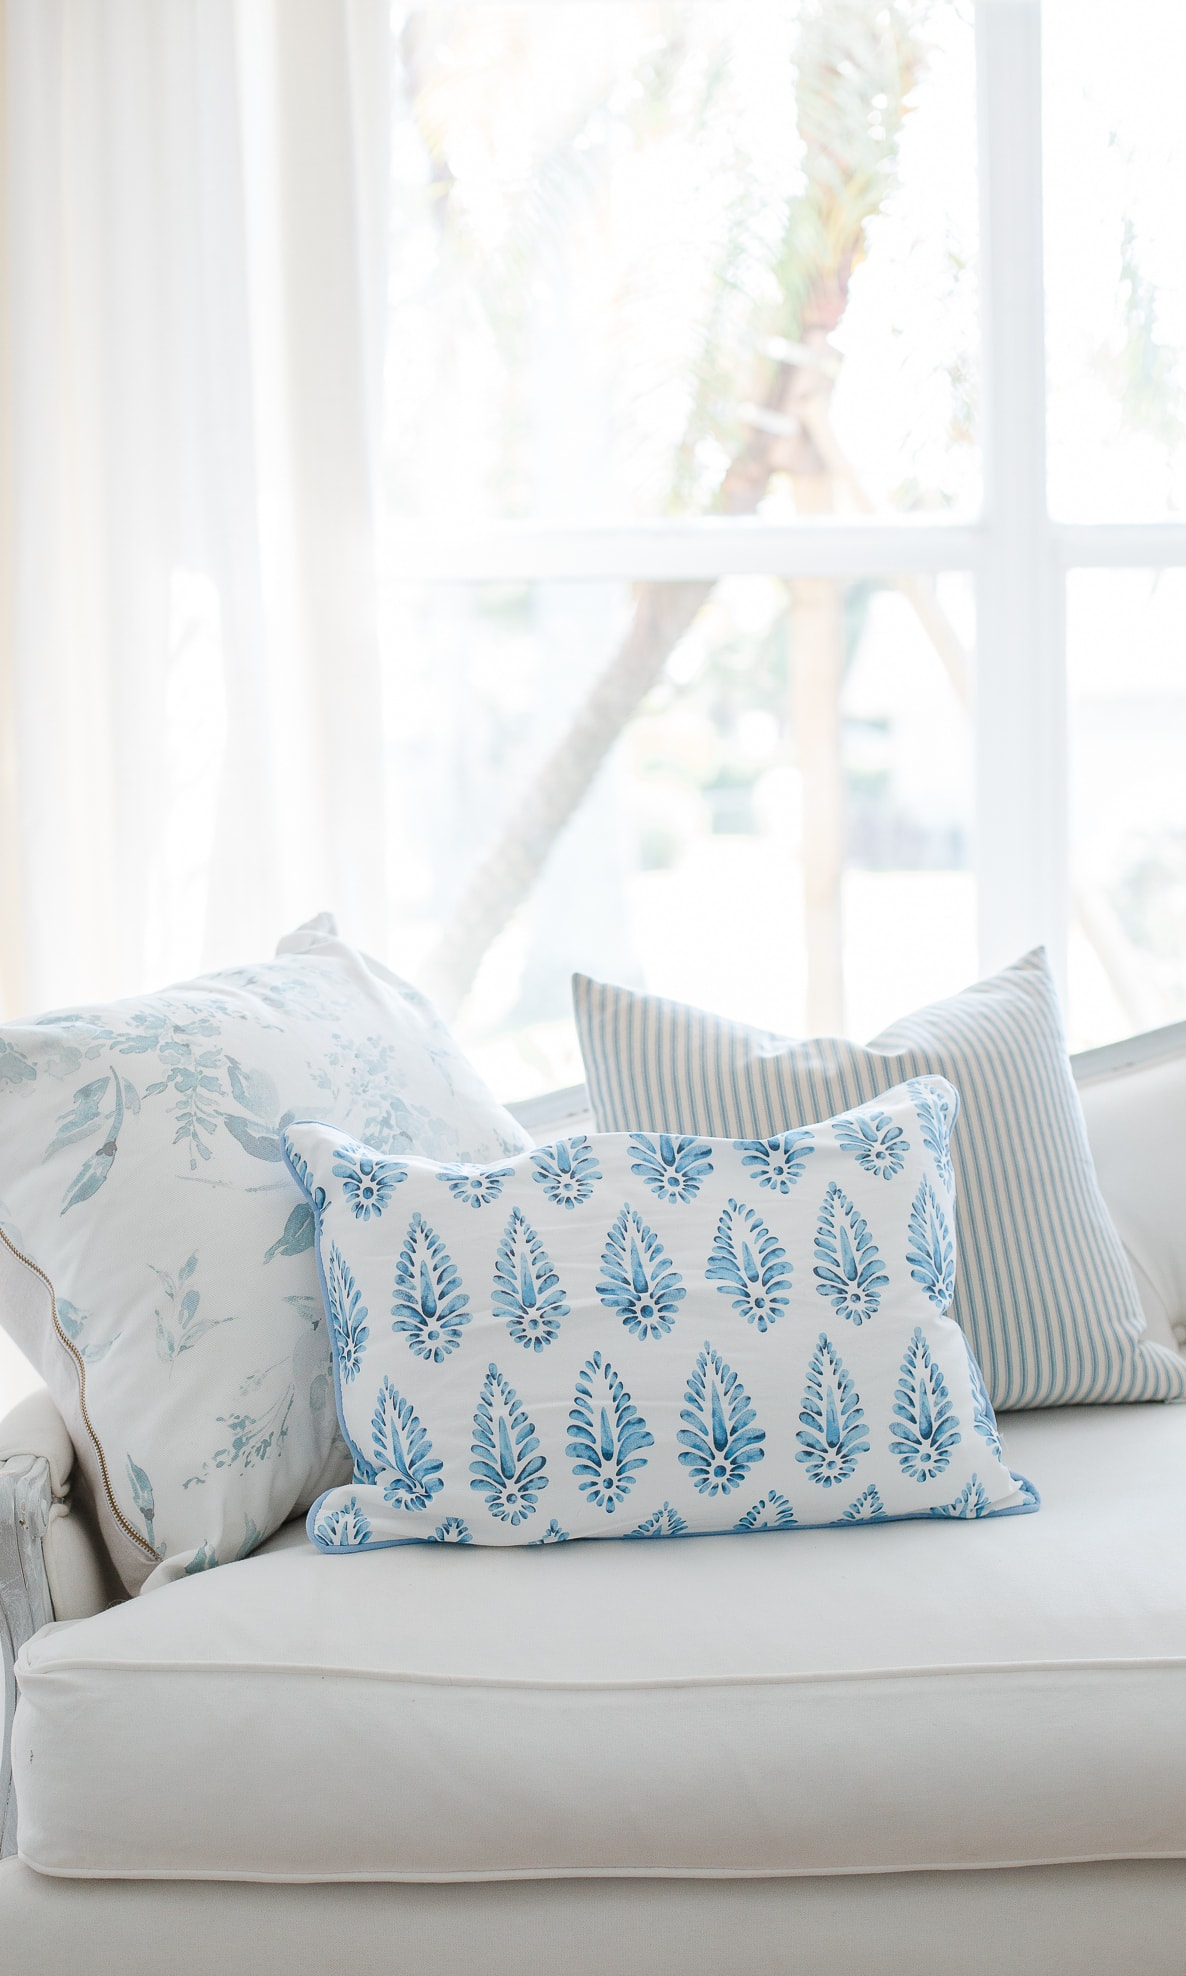 Ten Best Ways to Arrange Pillows on a Couch